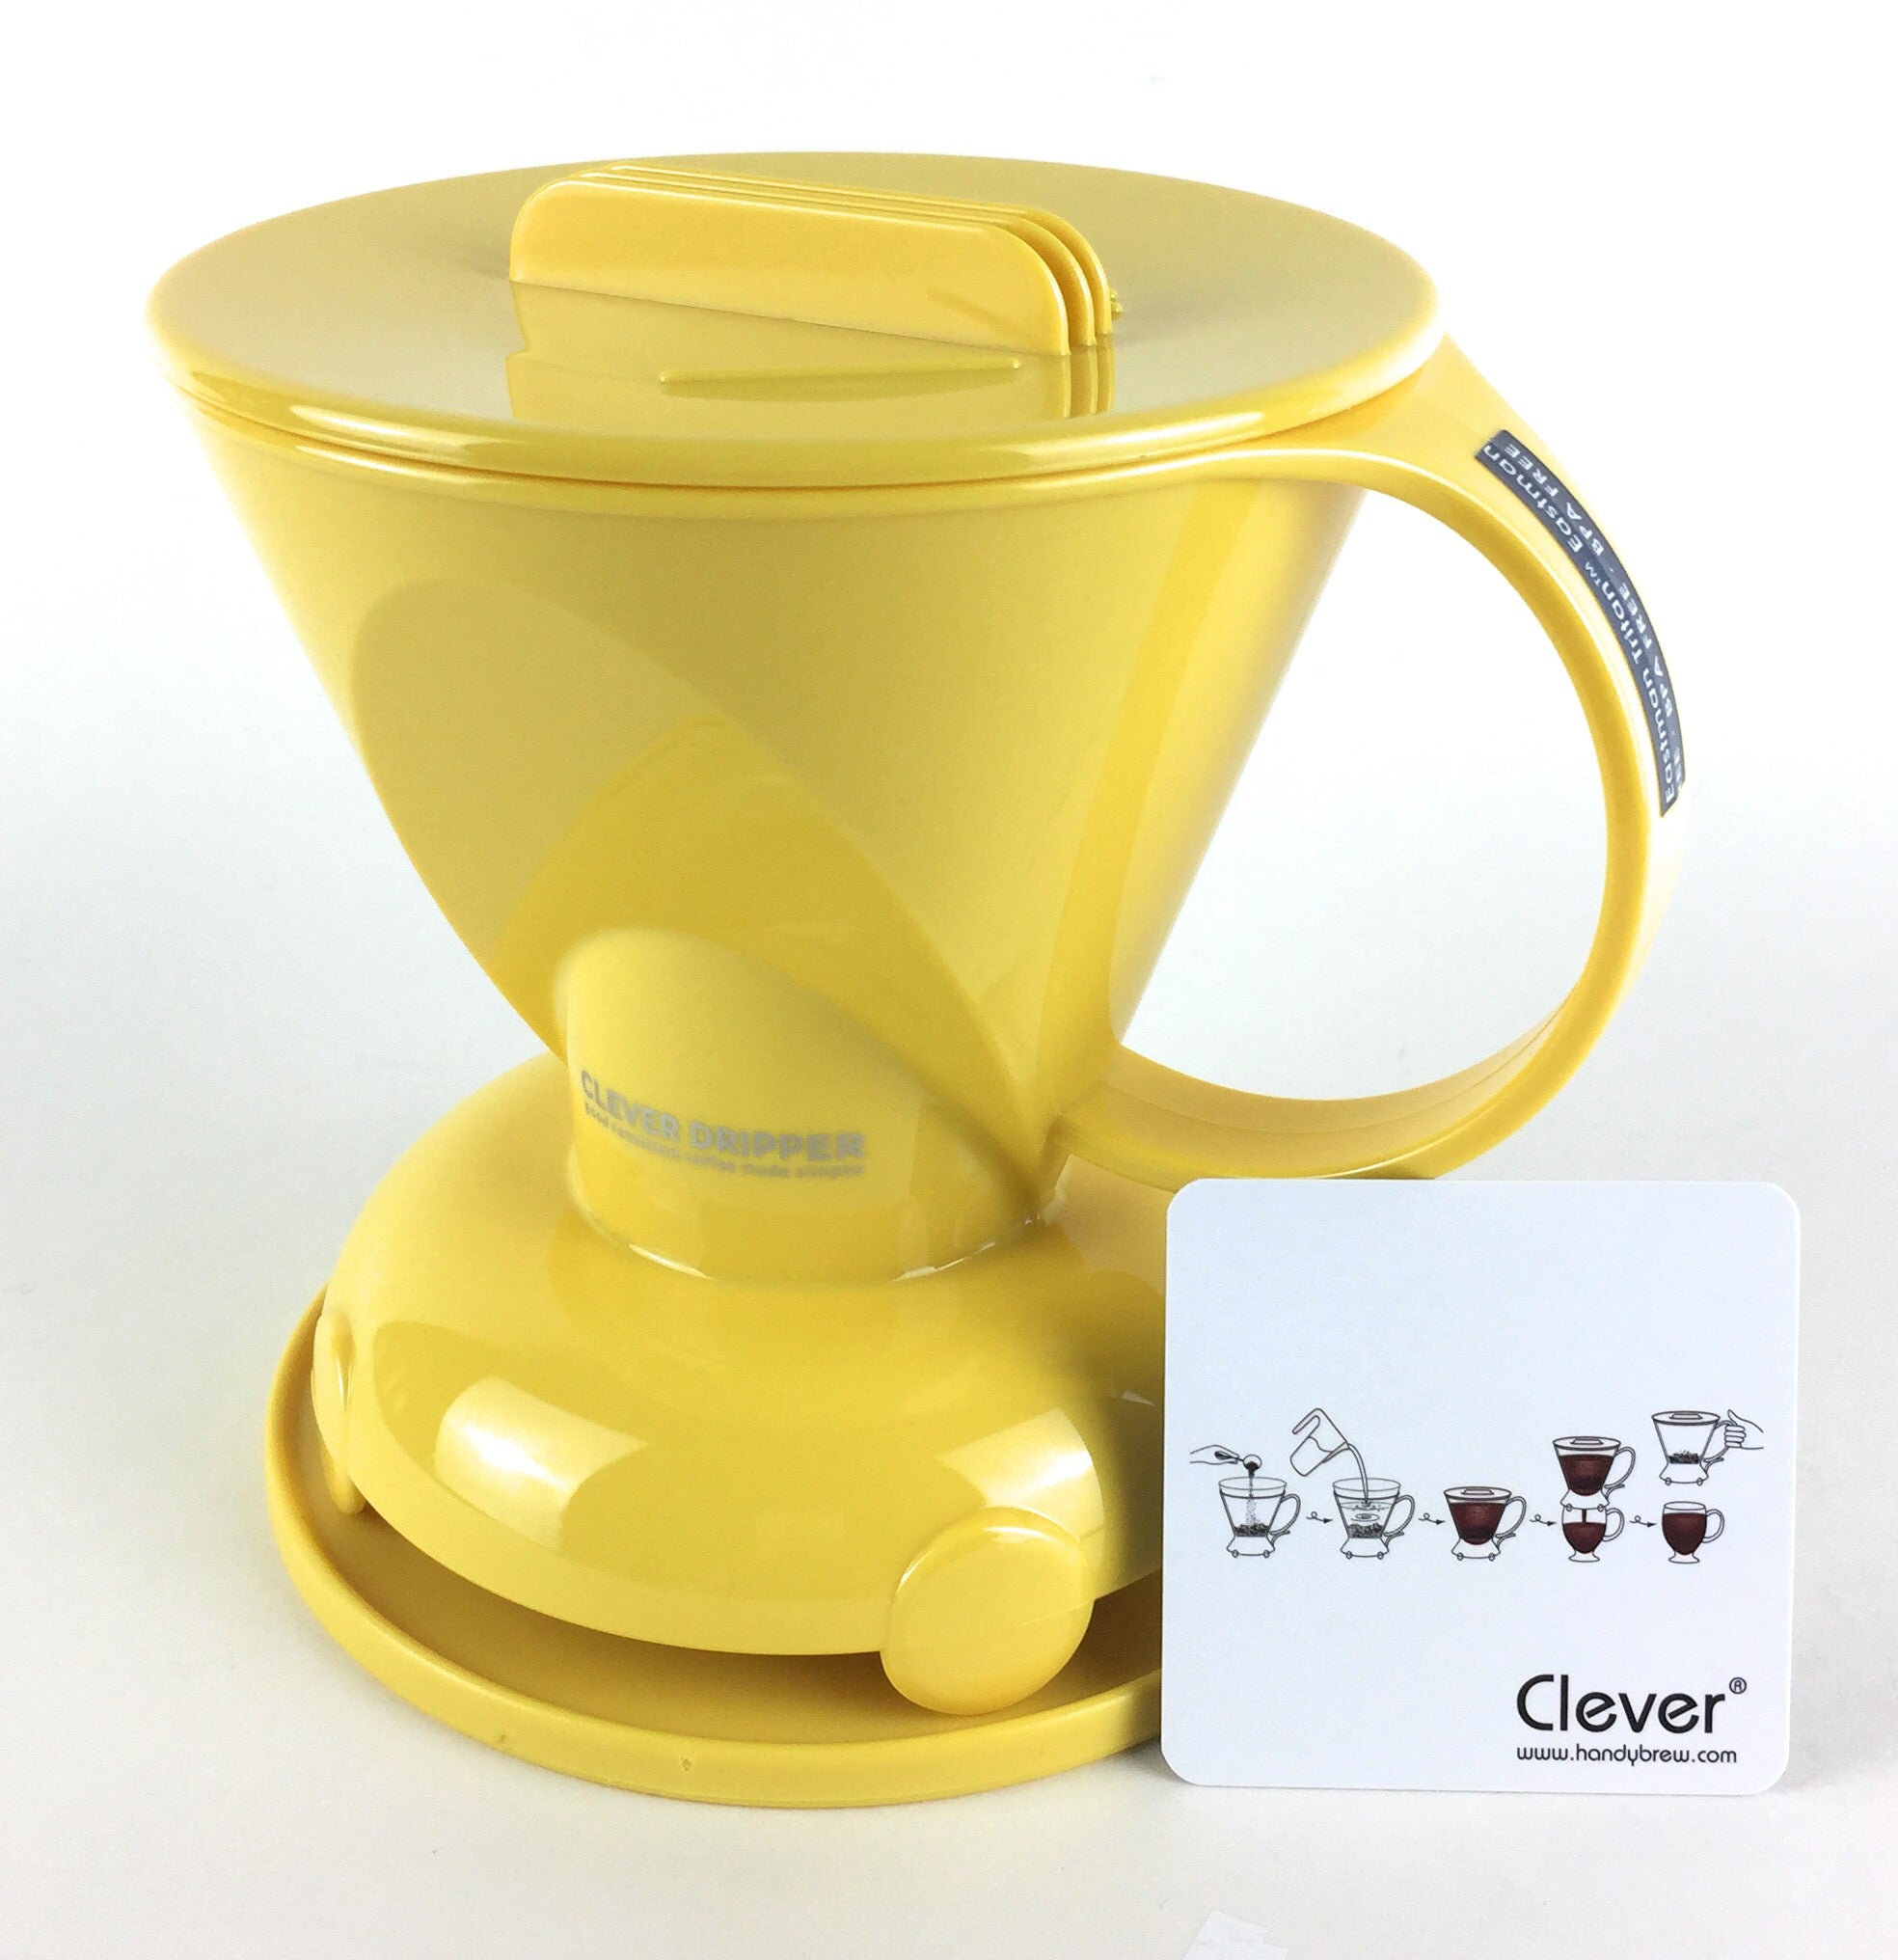 Clever Dripper Coffee Maker York Yellow, BPA Free, Hassle-Free Brew – PJT  prime